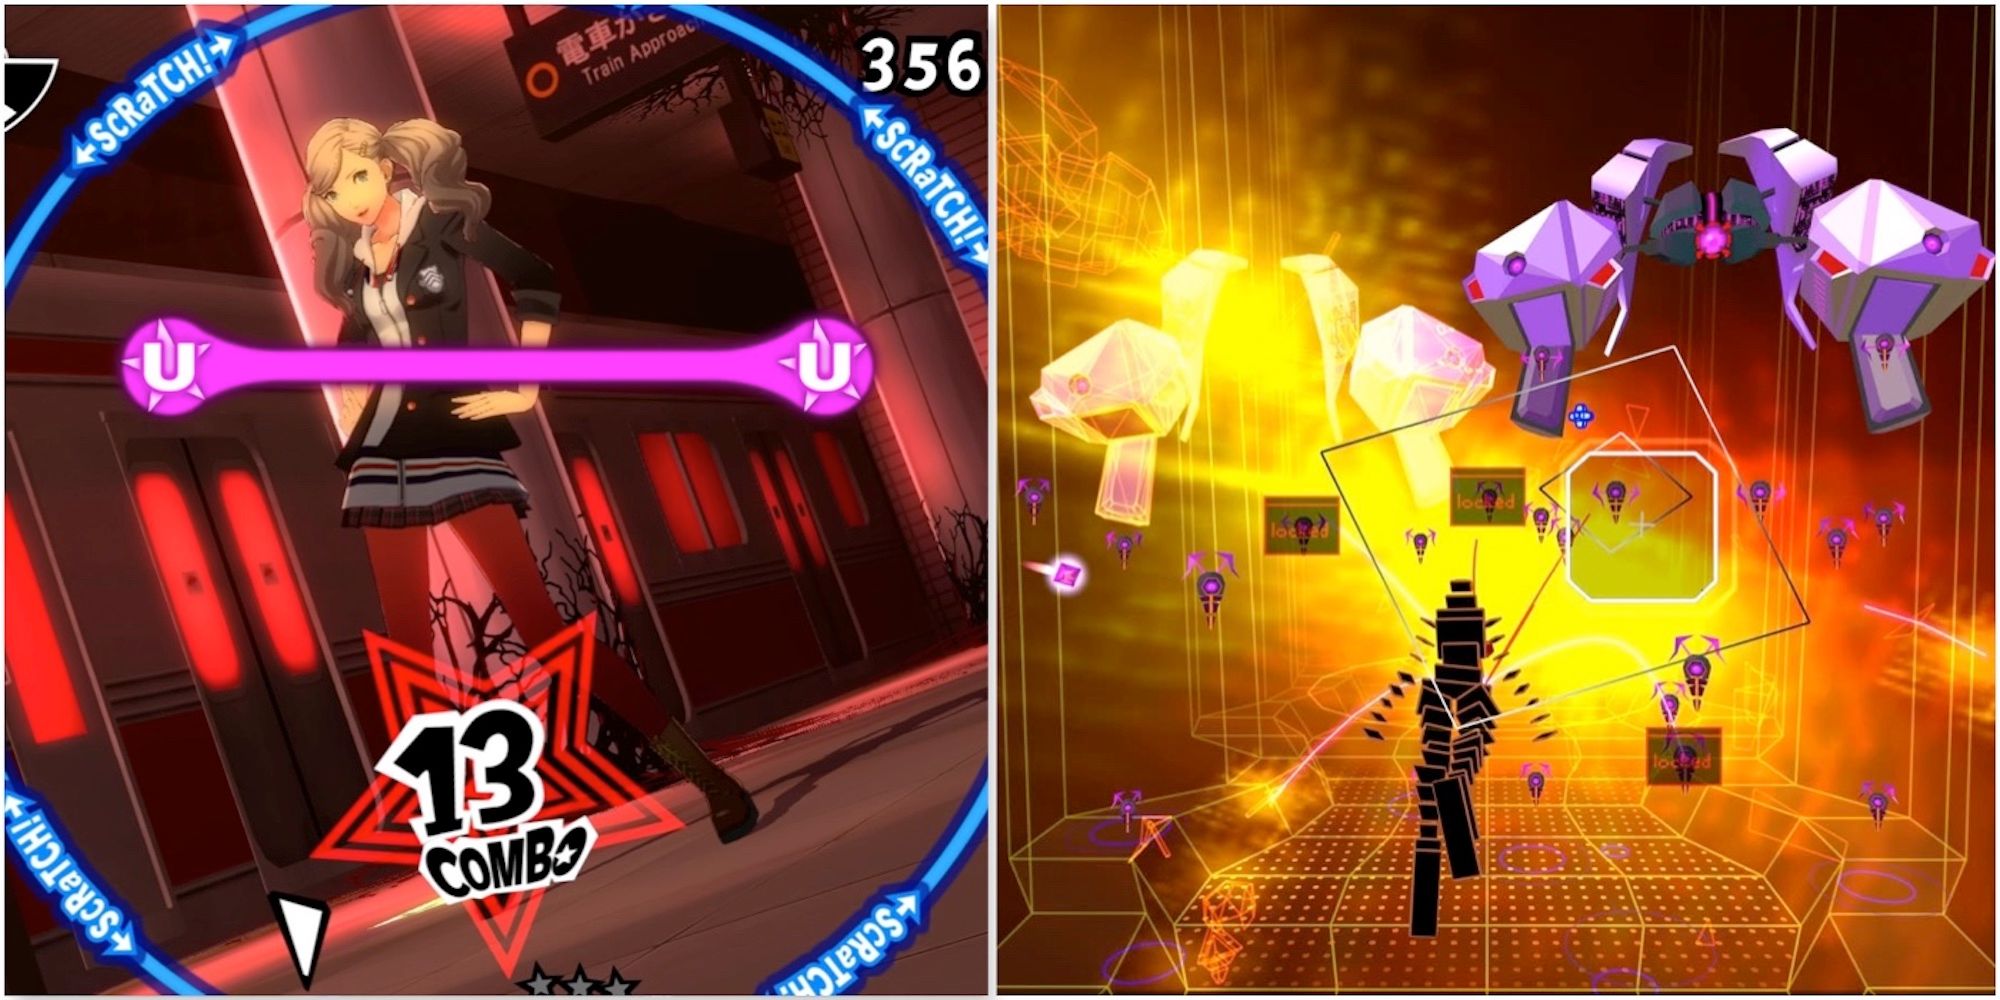 Playing through levels in Persona 5: Dancing In Starlight and Rez Infinite